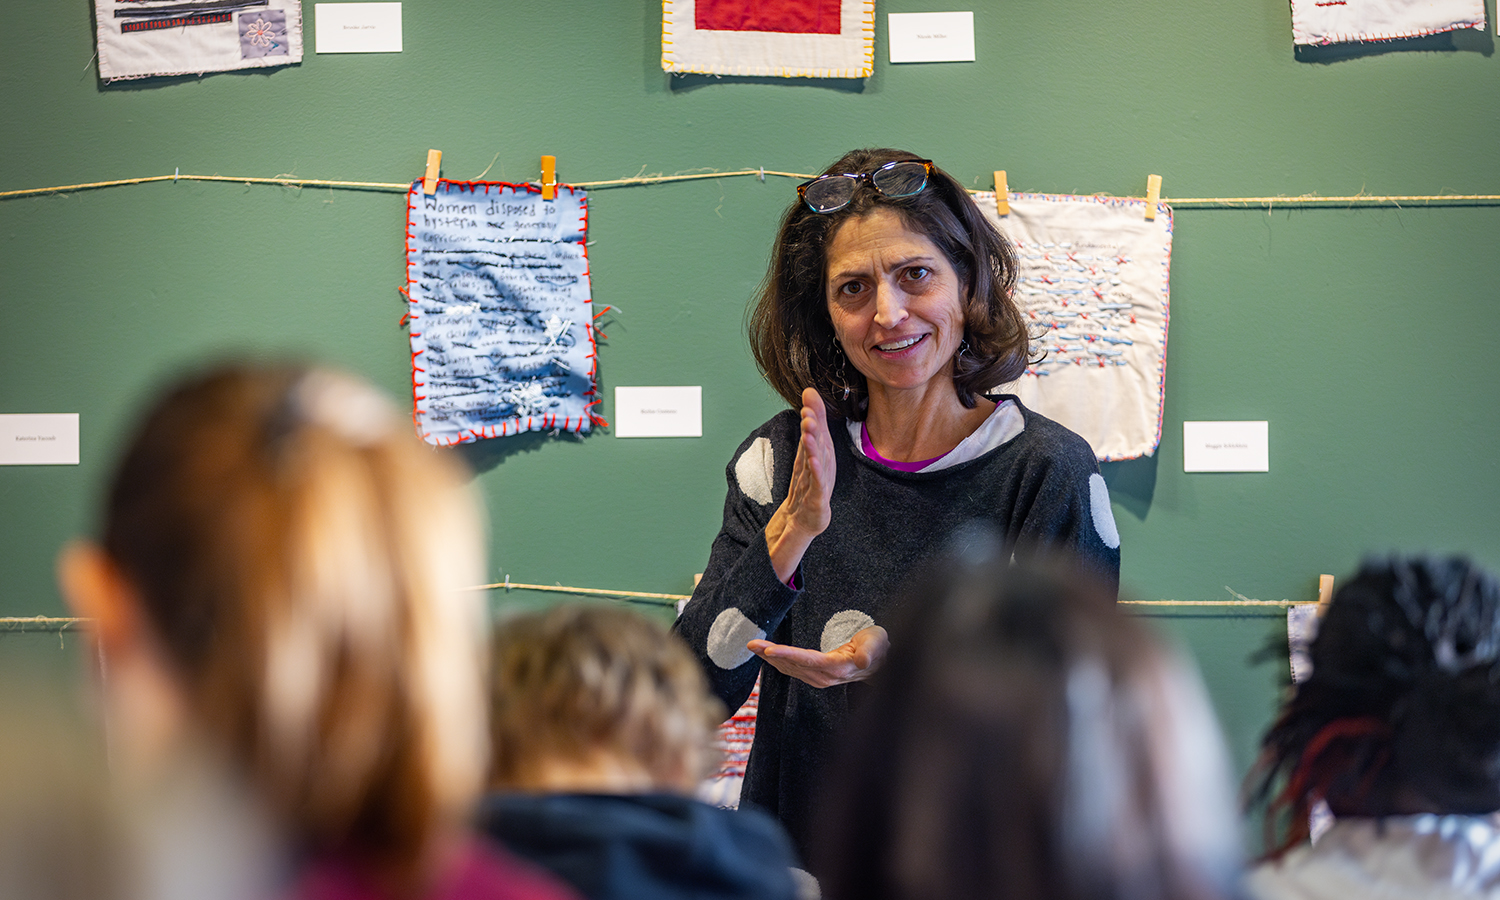 At the Provenzano Student Art Gallery, Associate Professor of American Studies Kirin Makker leads a discussion during “Drawing for Study and Storytelling.”